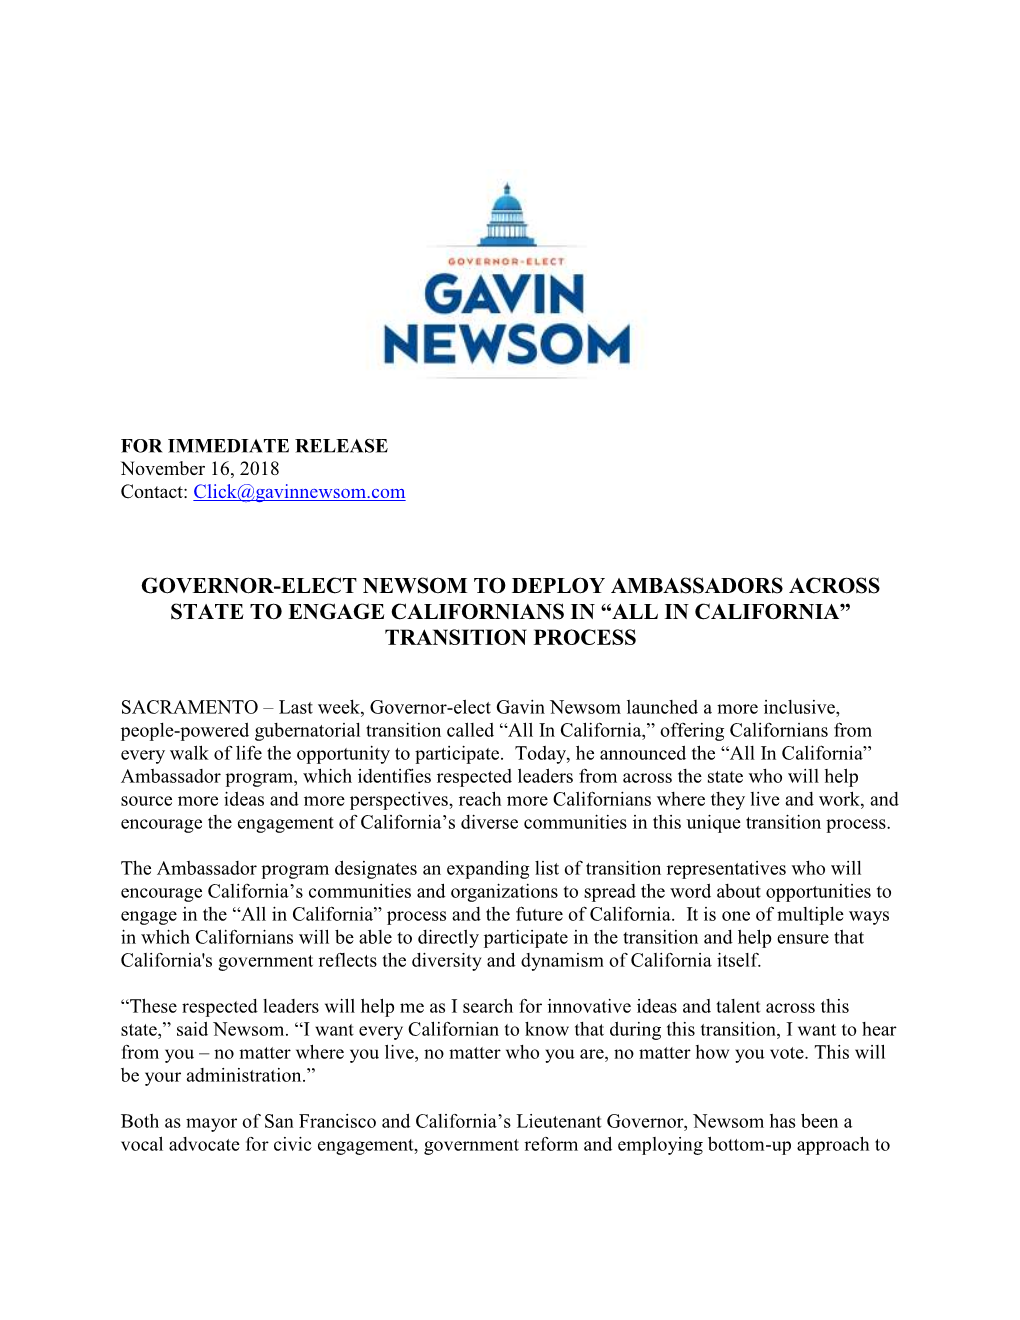 Governor-Elect Newsom to Deploy Ambassadors Across State to Engage Californians in “All in California” Transition Process